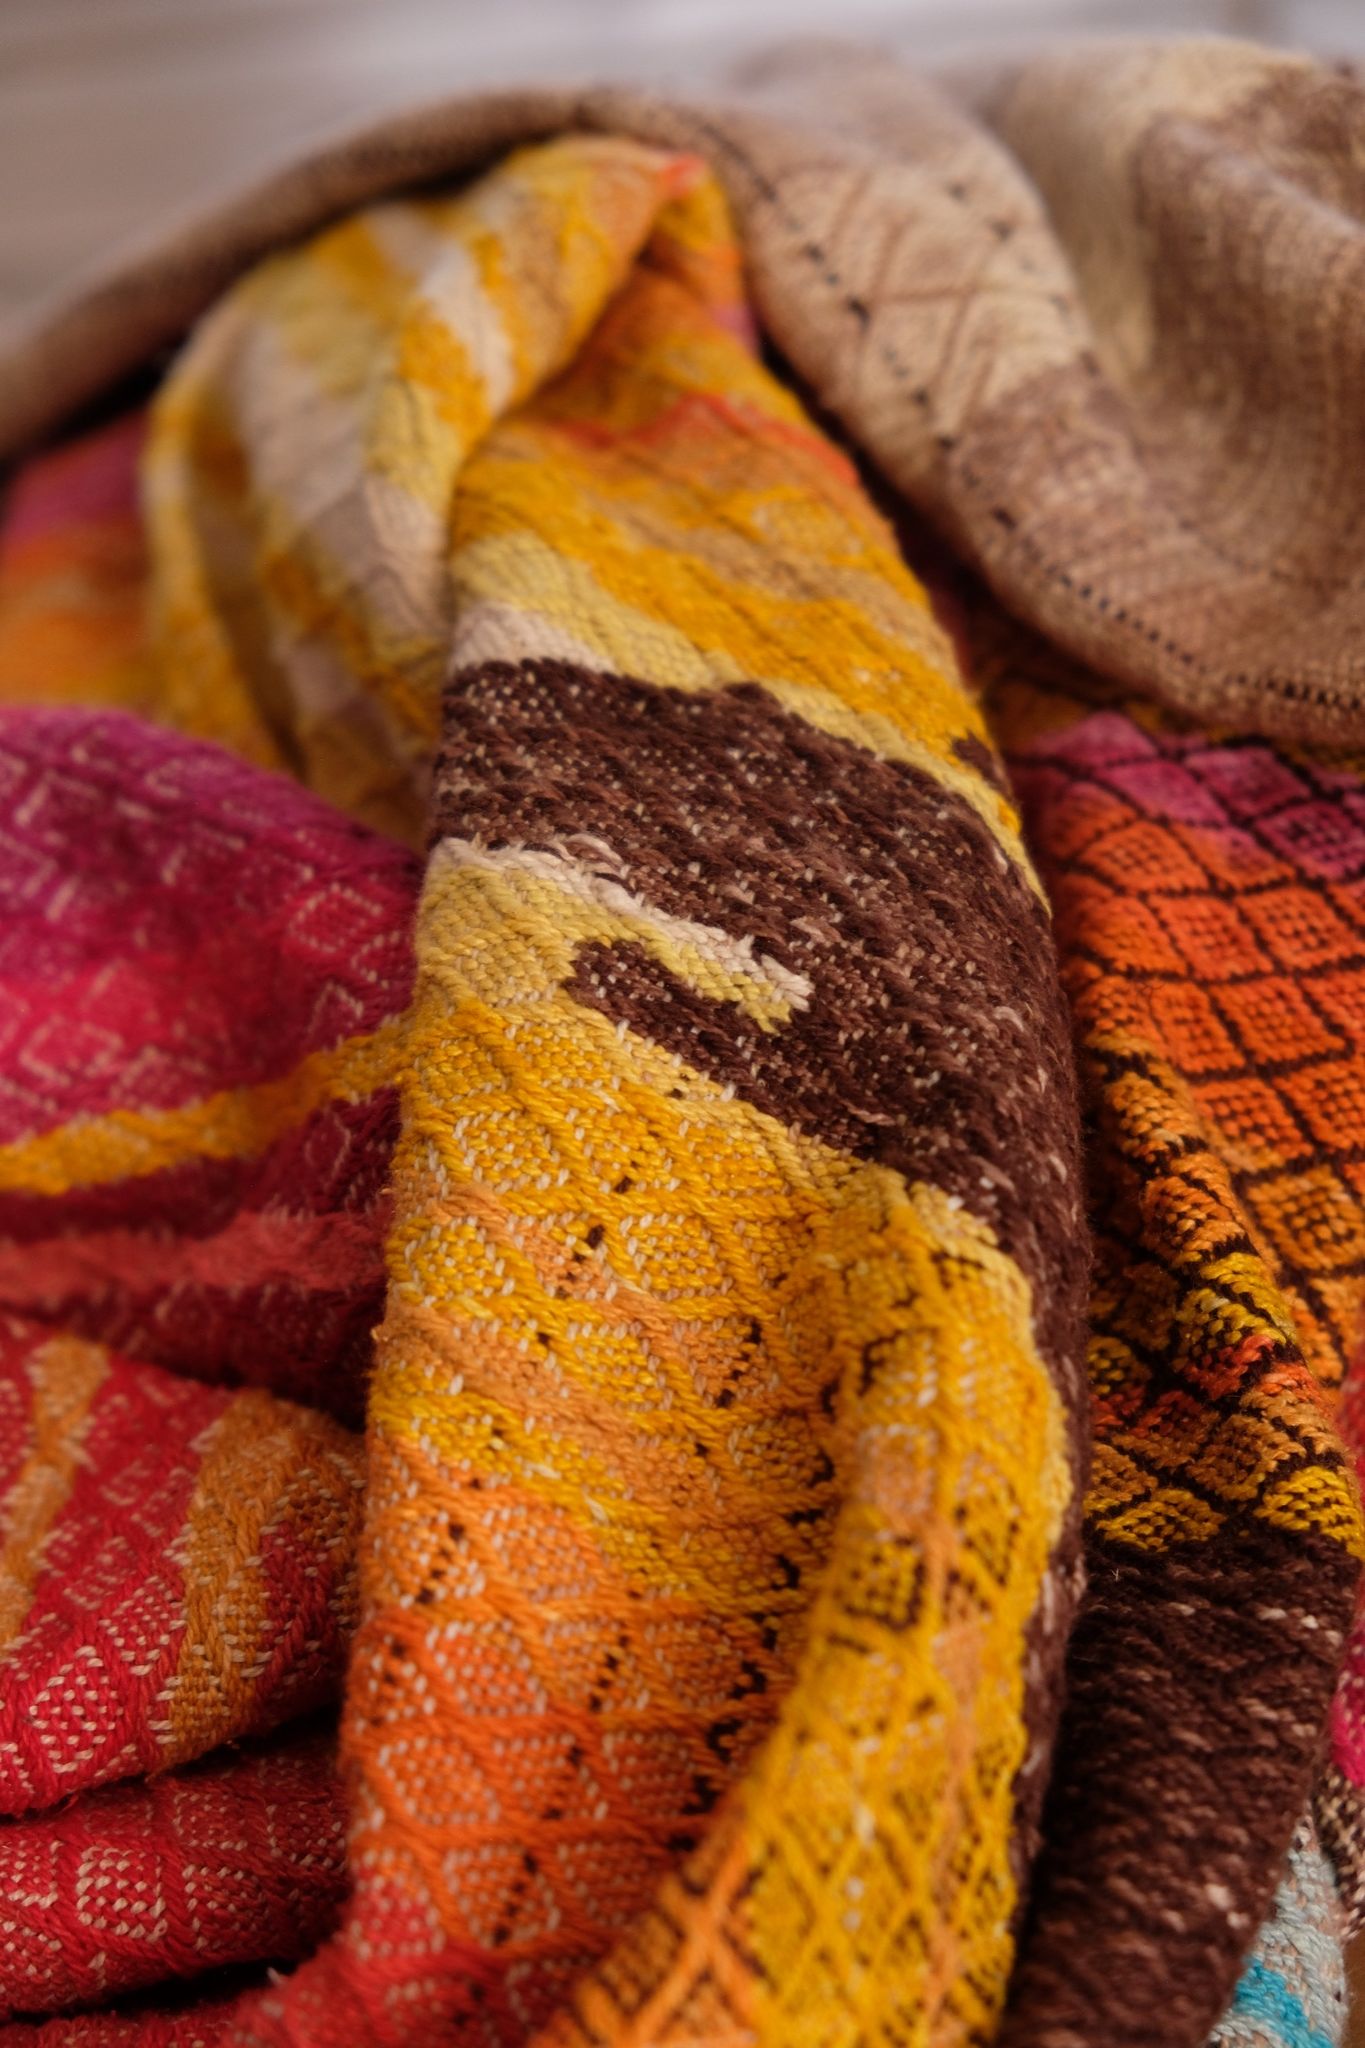 Handwoven, highly textures Diamond pattern fabric in every color of the rainbow, with natural browns and tans